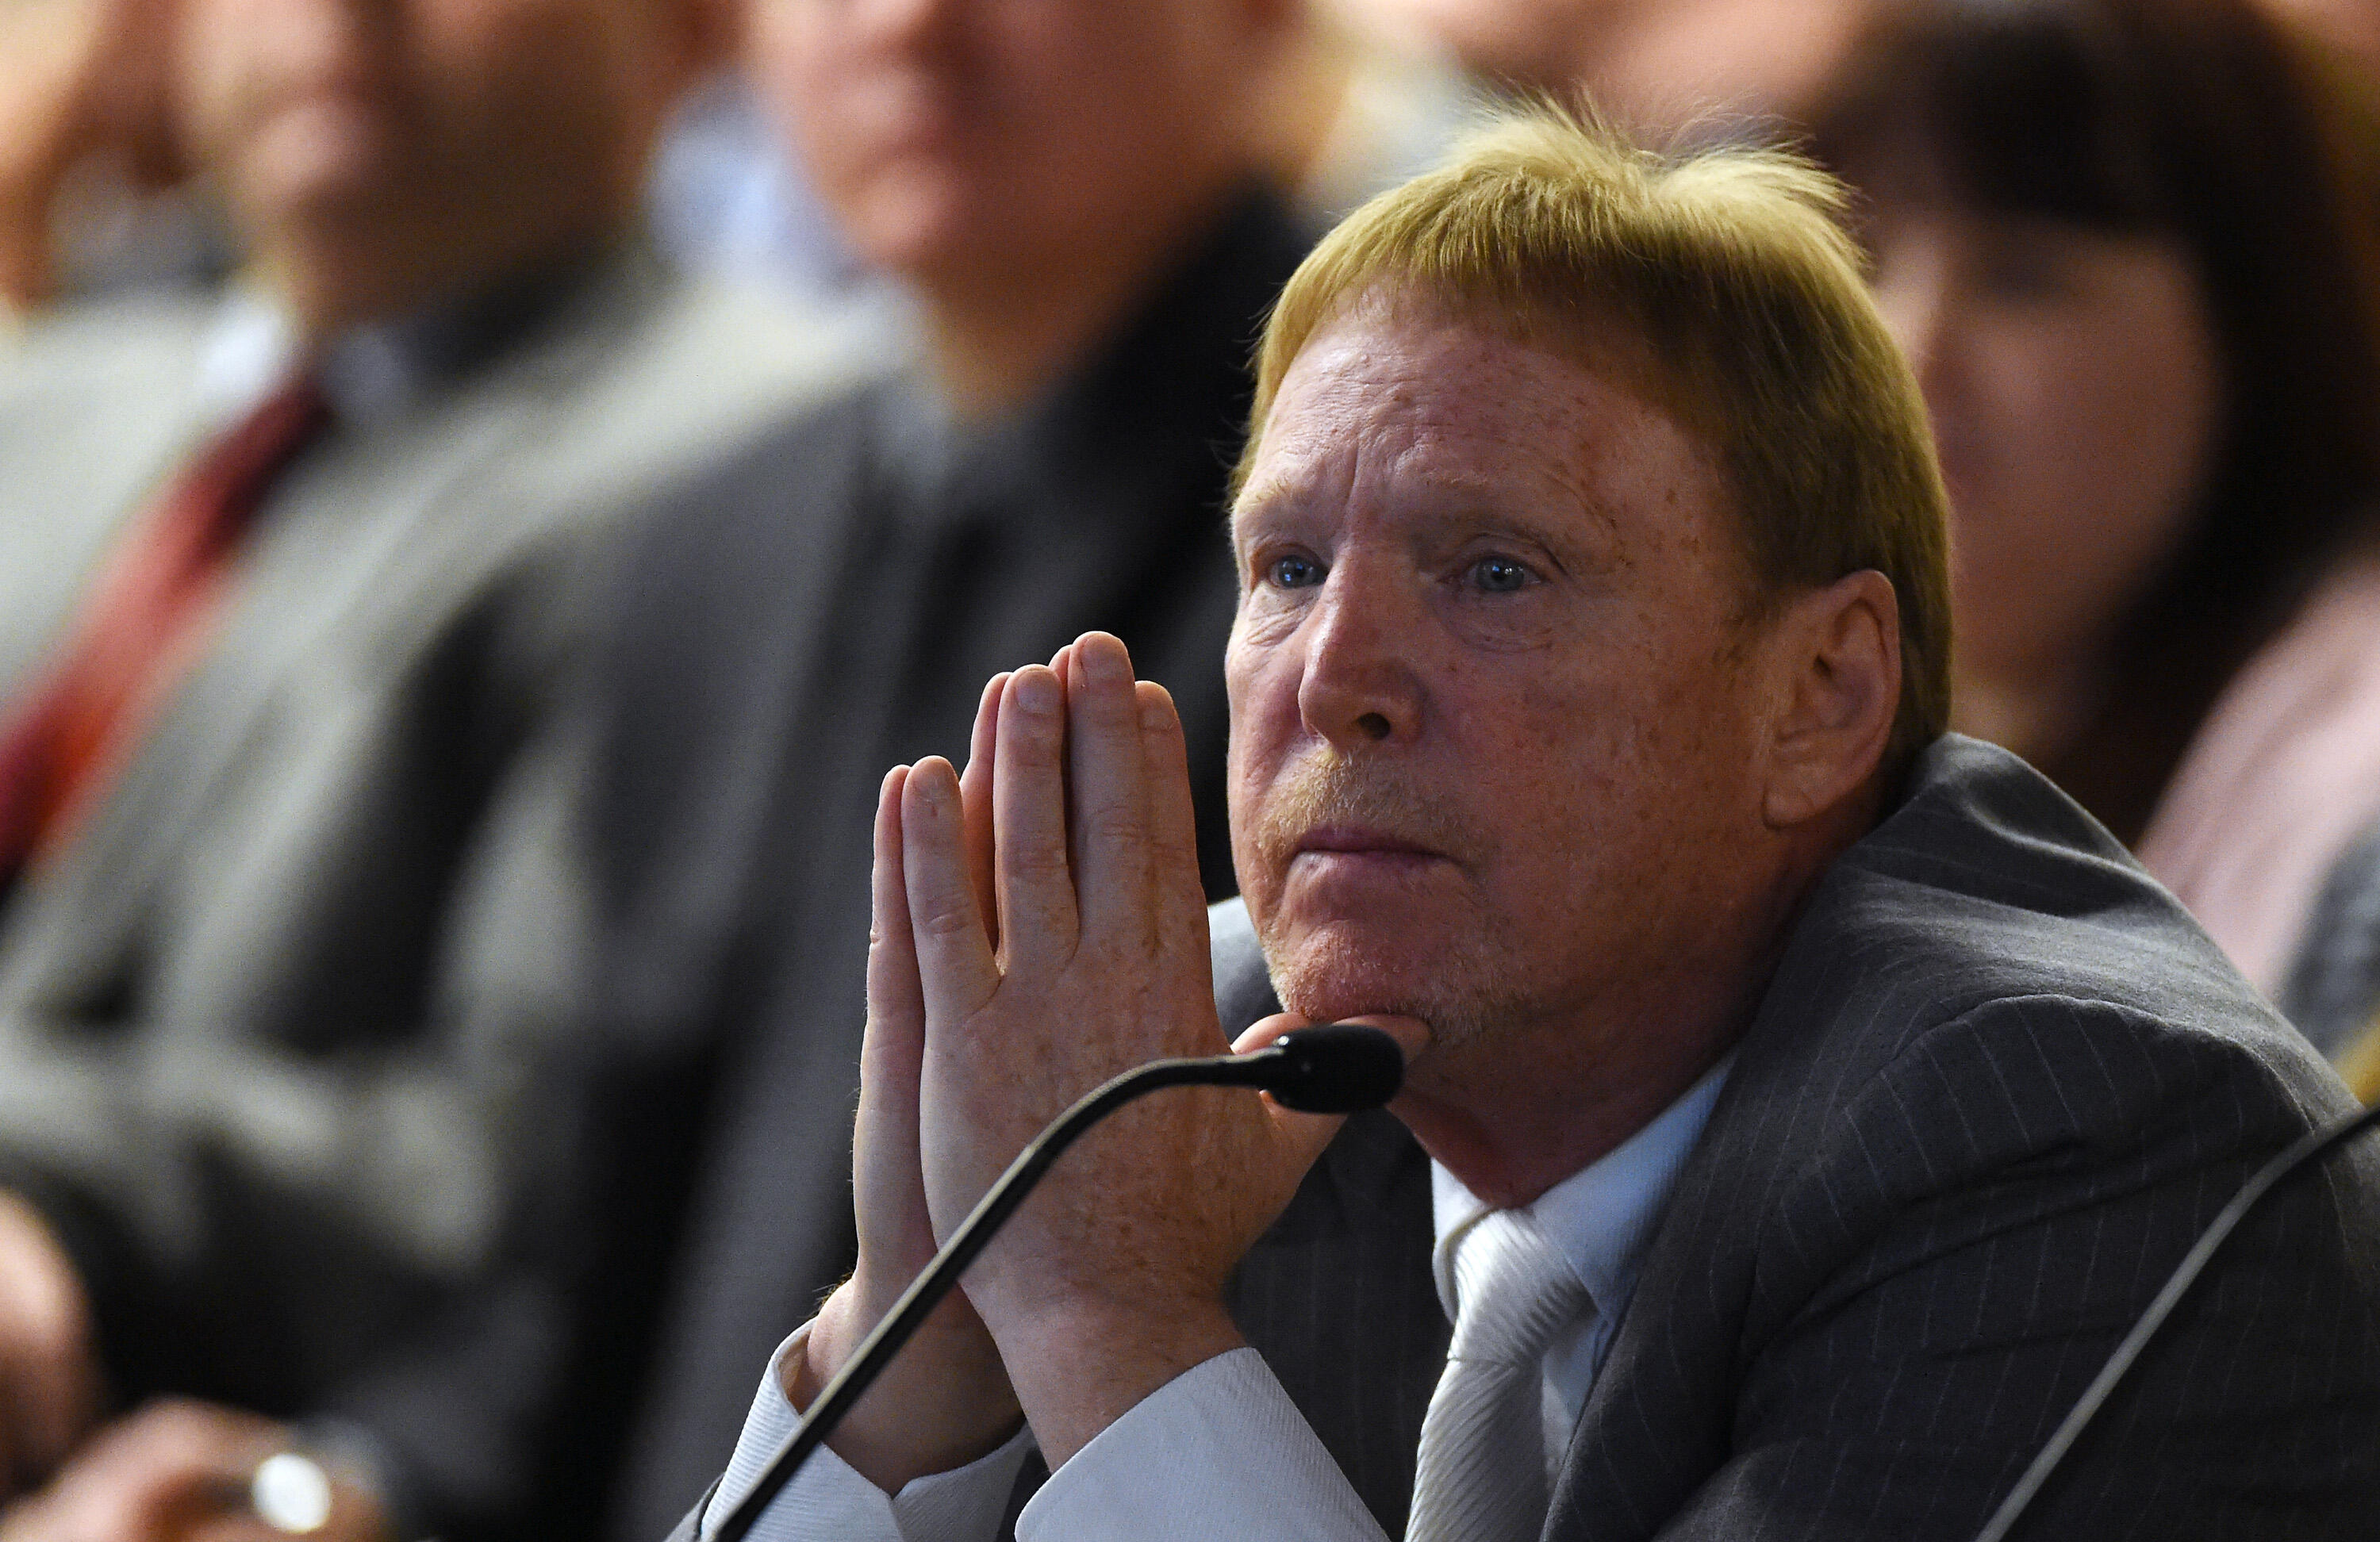 LAS VEGAS, NV - APRIL 28:  Oakland Raiders owner Mark Davis attends a Southern Nevada Tourism Infrastructure Committee meeting at UNLV on April 28, 2016 in Las Vegas, Nevada. Davis told the committee he is willing to spend USD 500 million as part of a dea